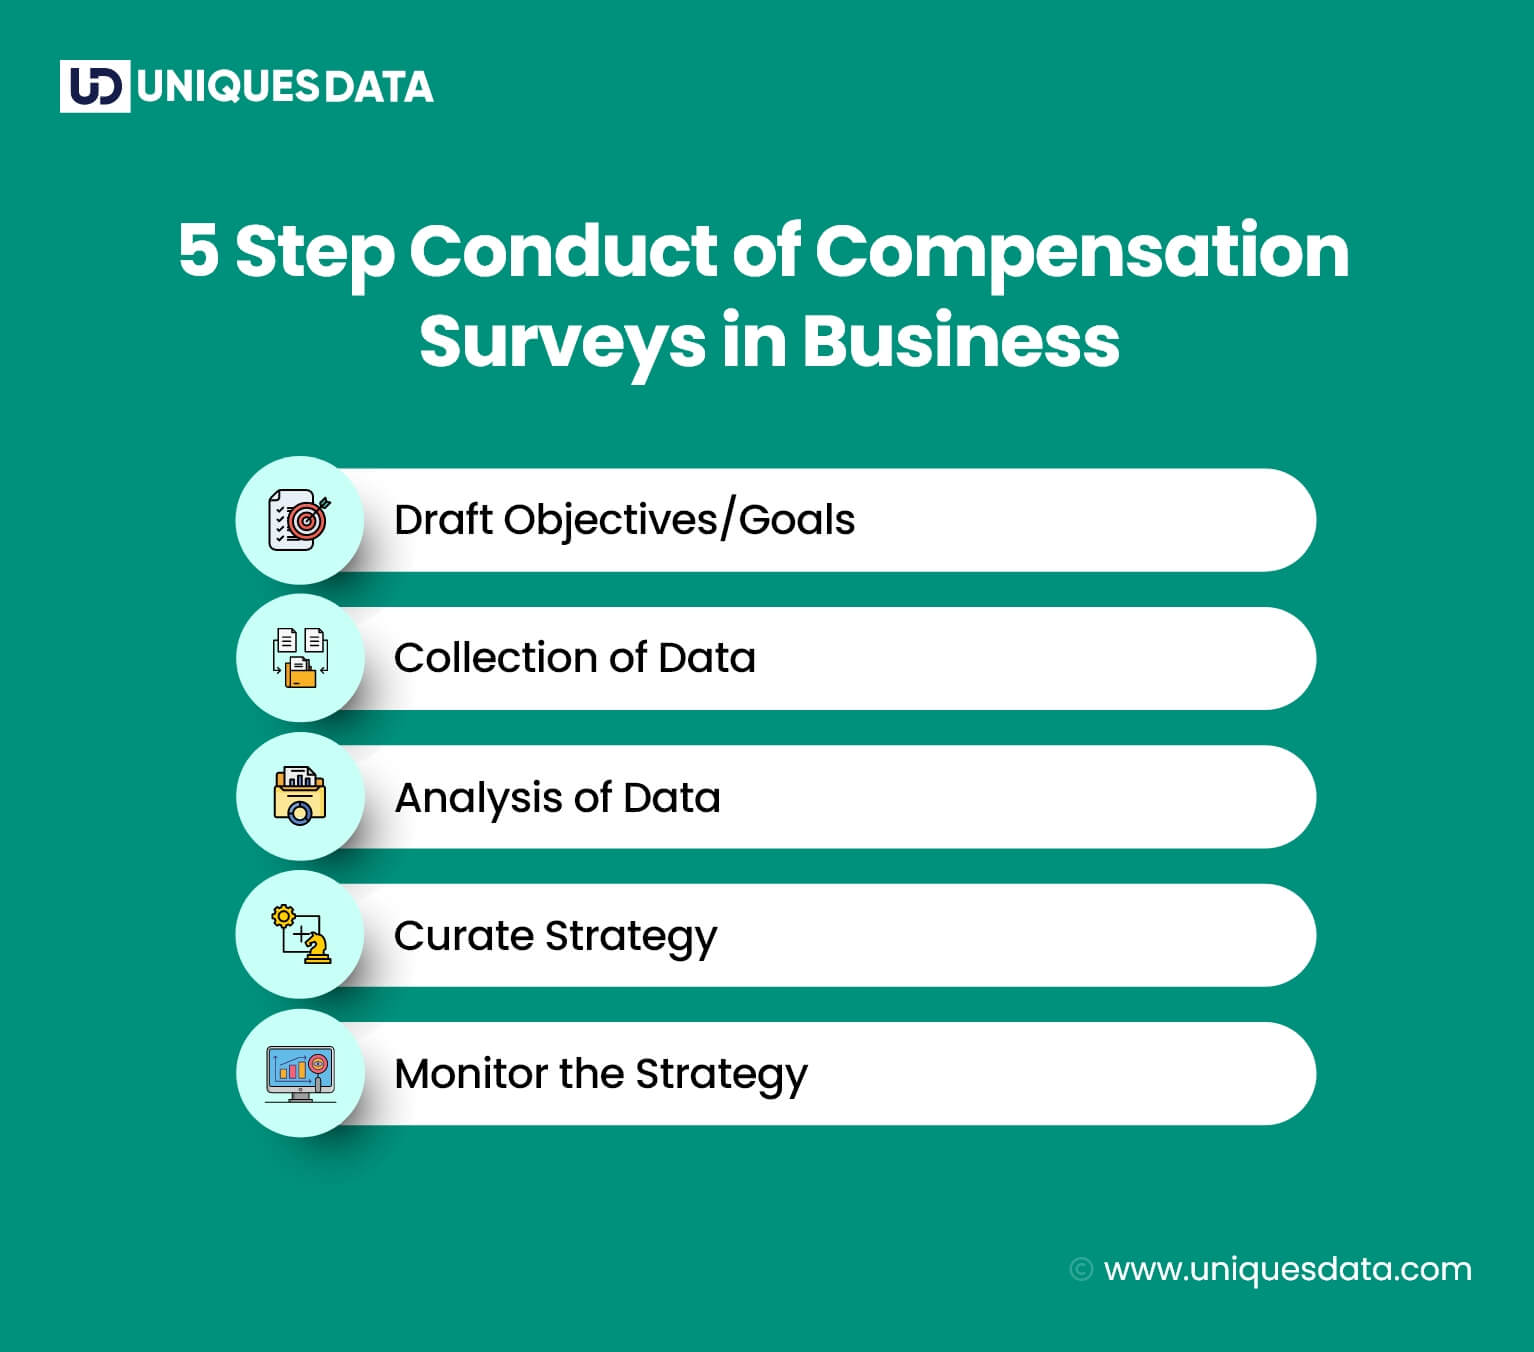 5 Step Conduct of Compensation Surveys in Business